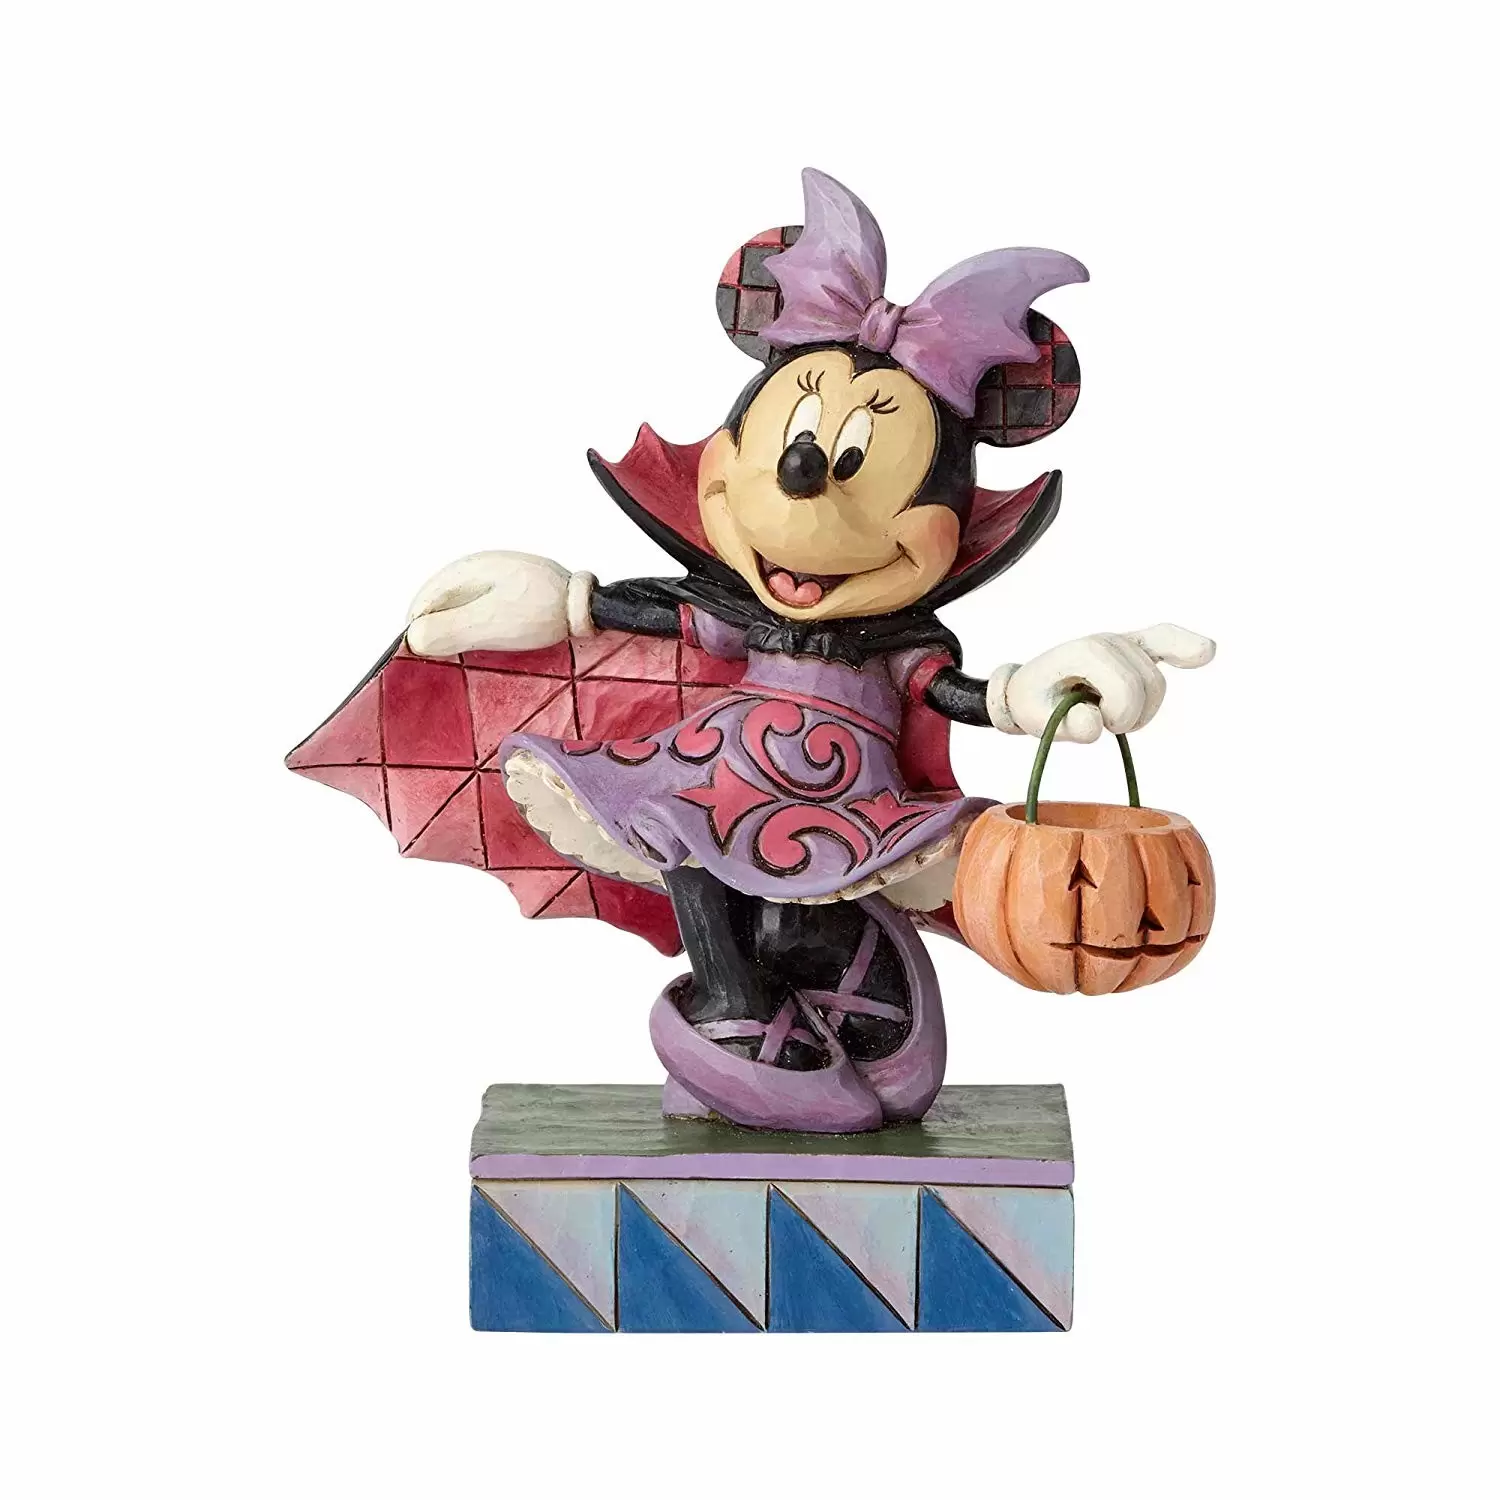 Disney Traditions by Jim Shore - Violet Vampire Minnie Mouse